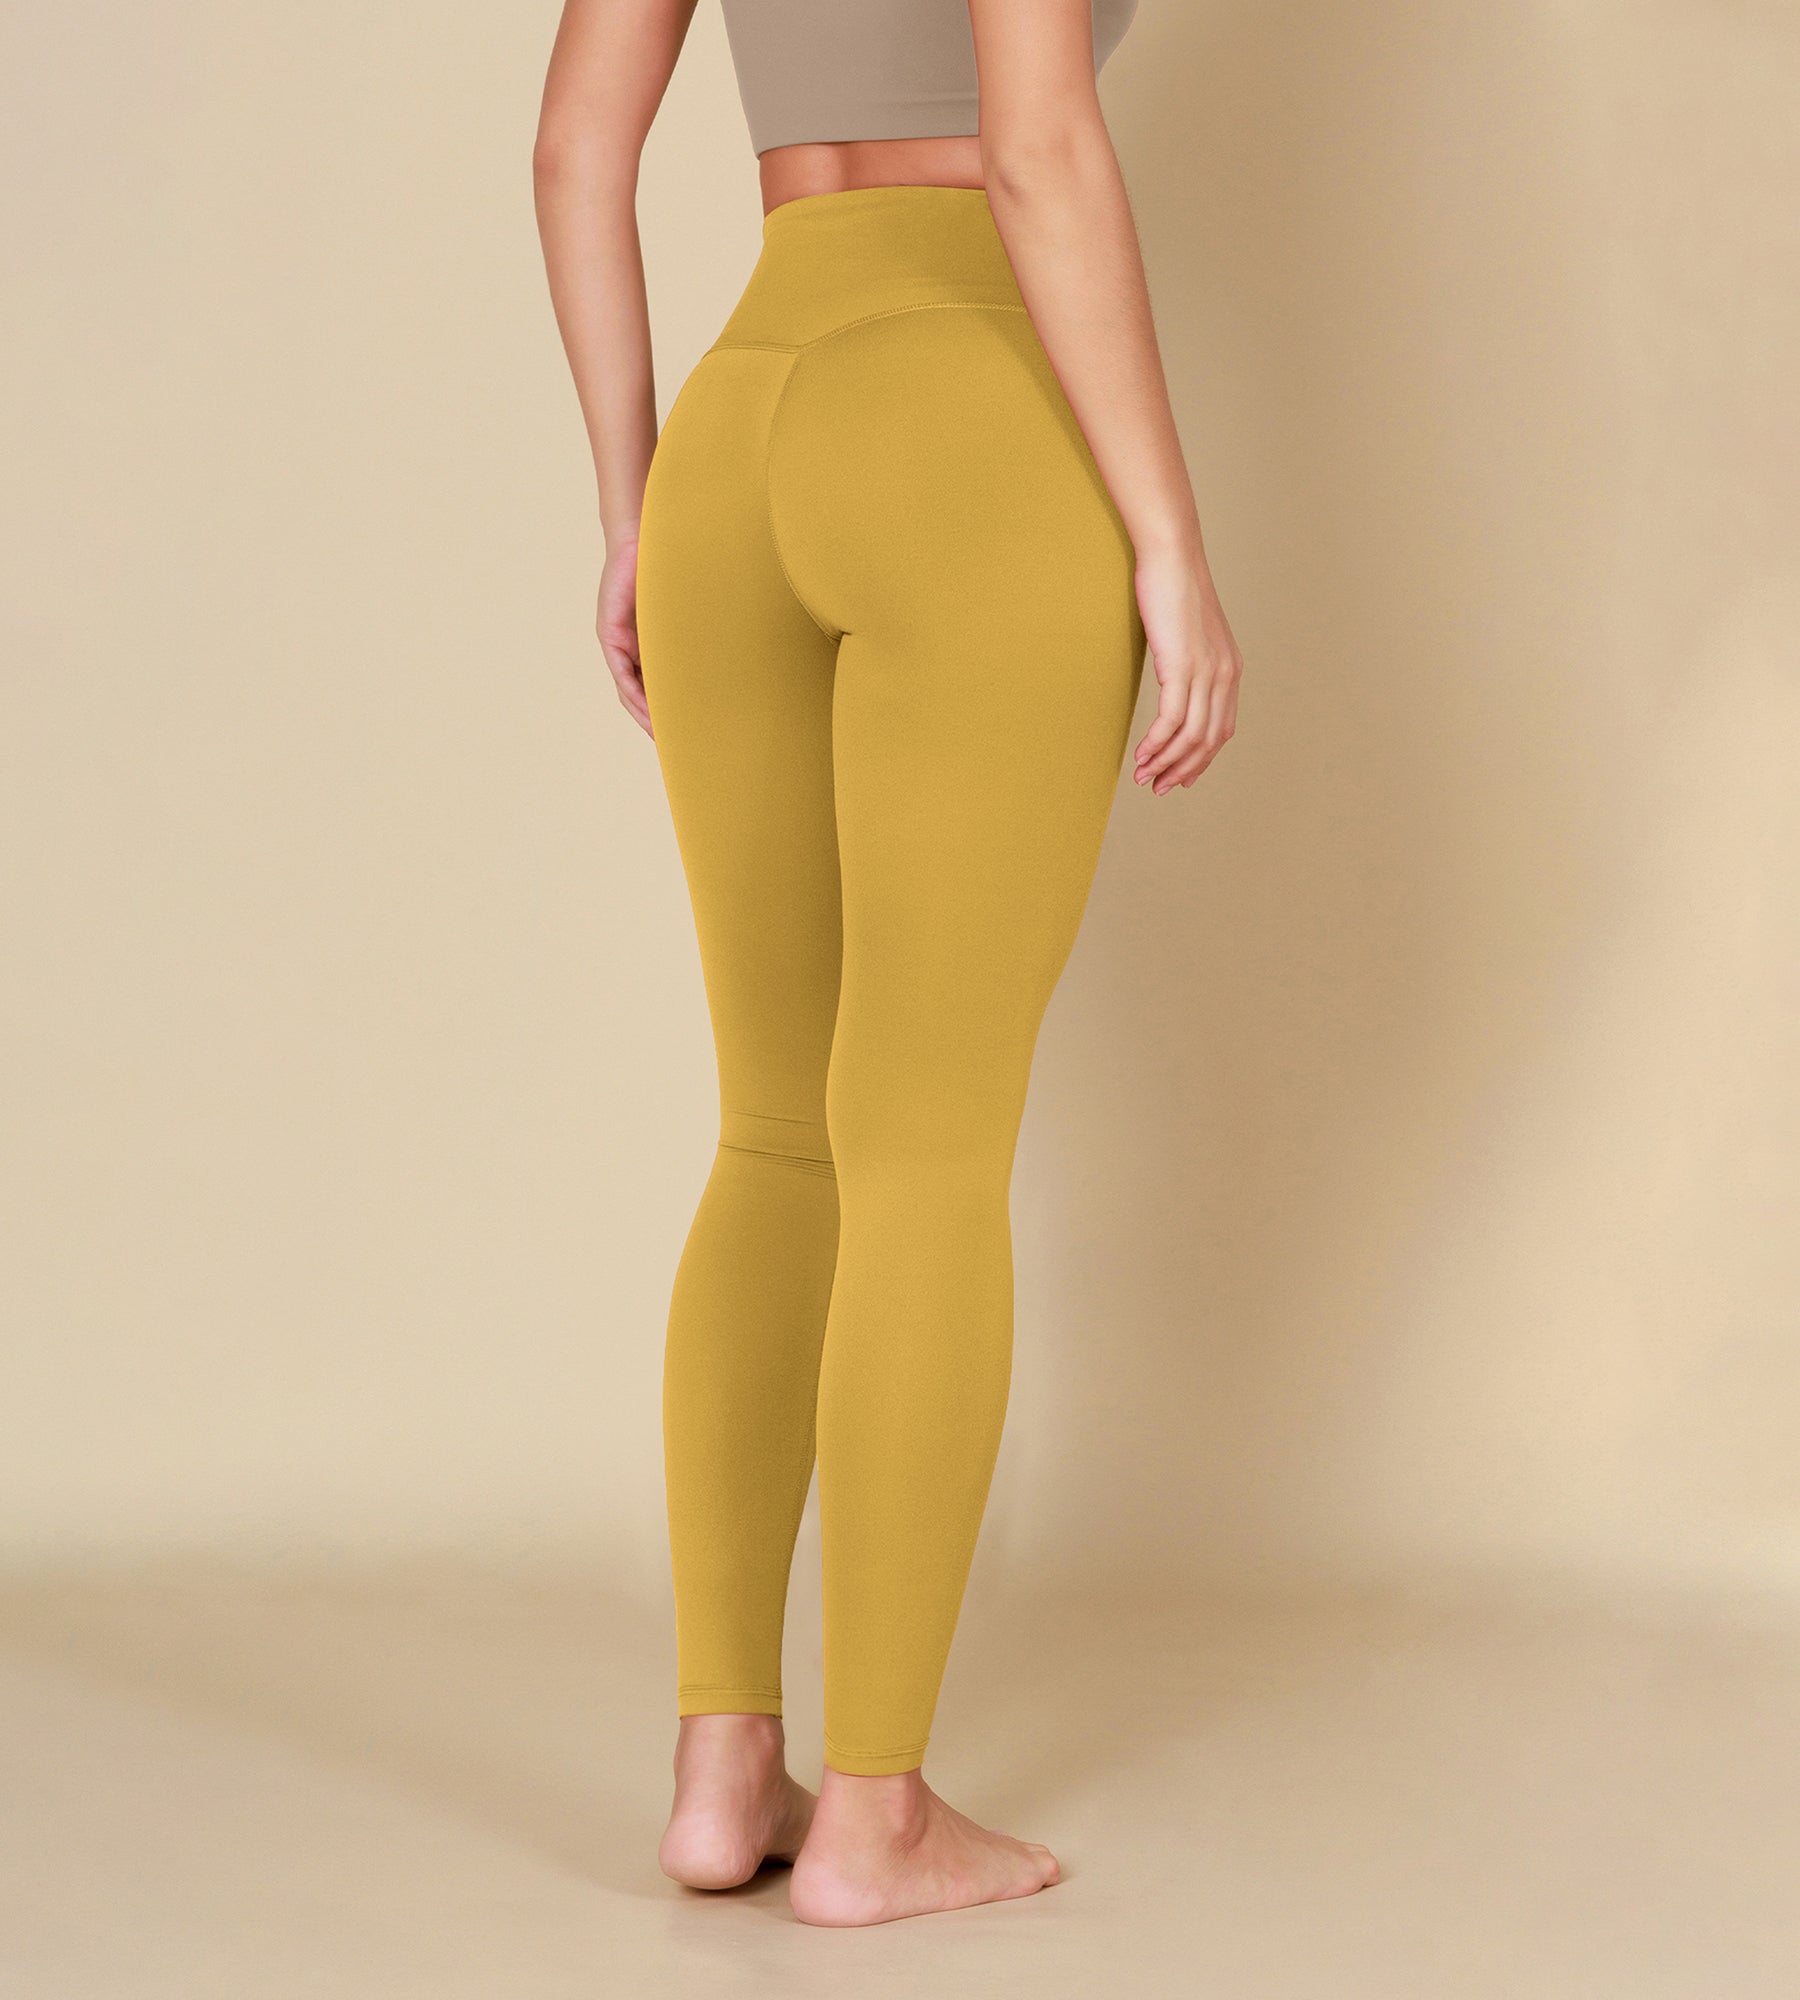 ODCLOUD Crossover 28" Leggings with Back Pocket - Limited Colors - ododos